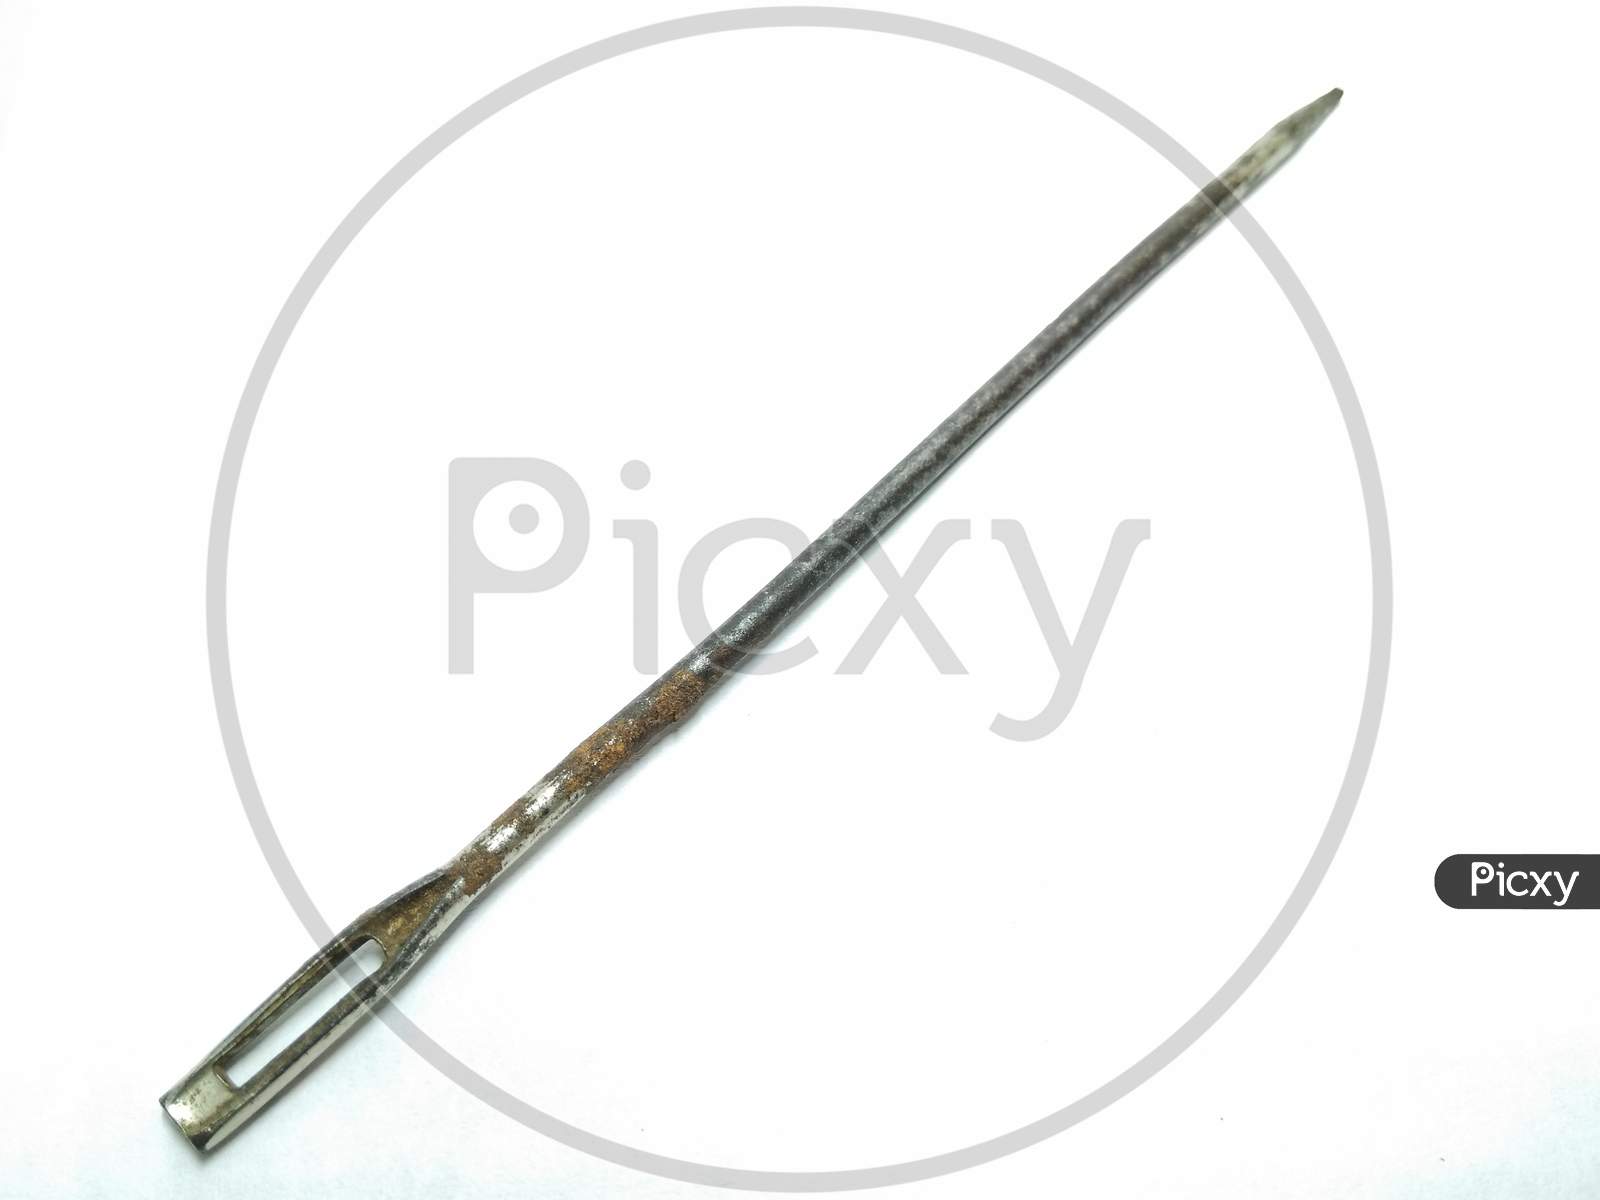 Steel Needle Or Needle Over an Isolated White